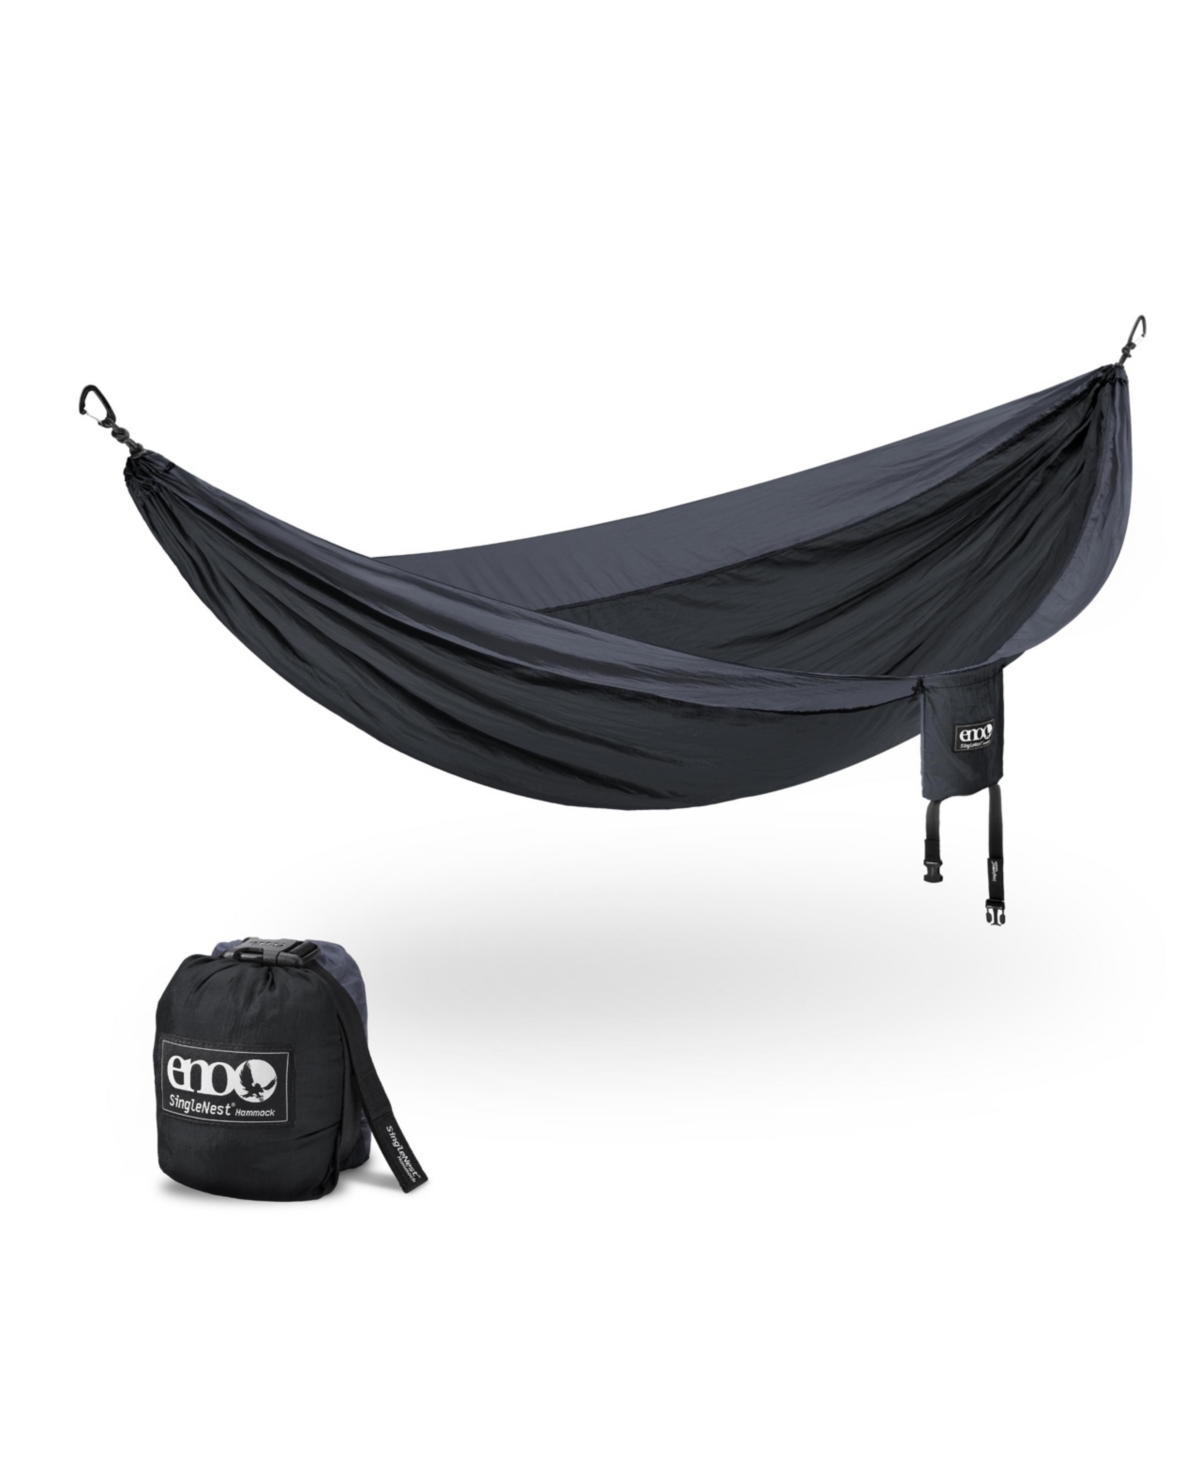 SingleNest Hammock - Lightweight, 1 Person Portable Hammock - For Camping, Hiking, Backpacking, Travel, a Festival, or the Beach - Black/Charcoal